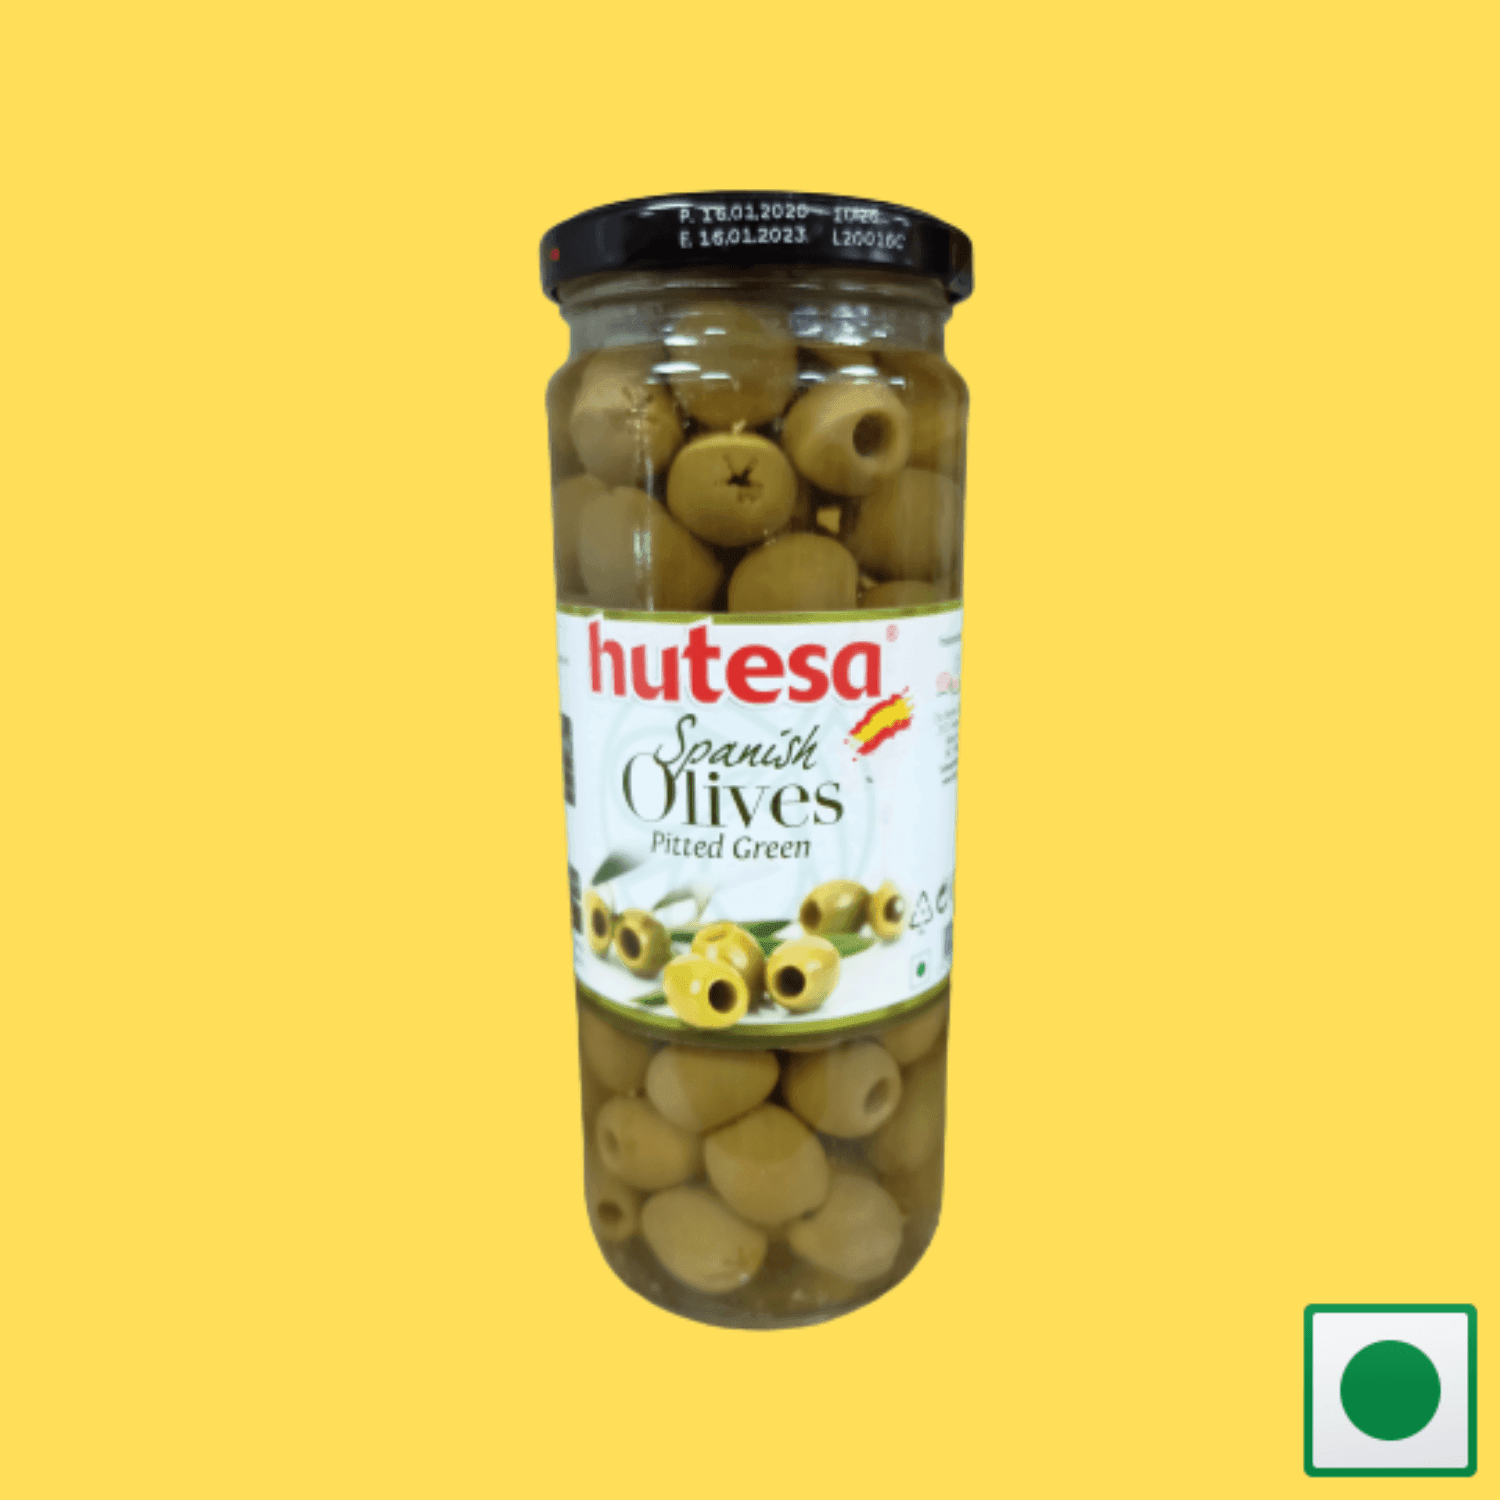 HUTESA SPANISH GREEN PITTED OLIVES 450G (Imported) - Super 7 Mart